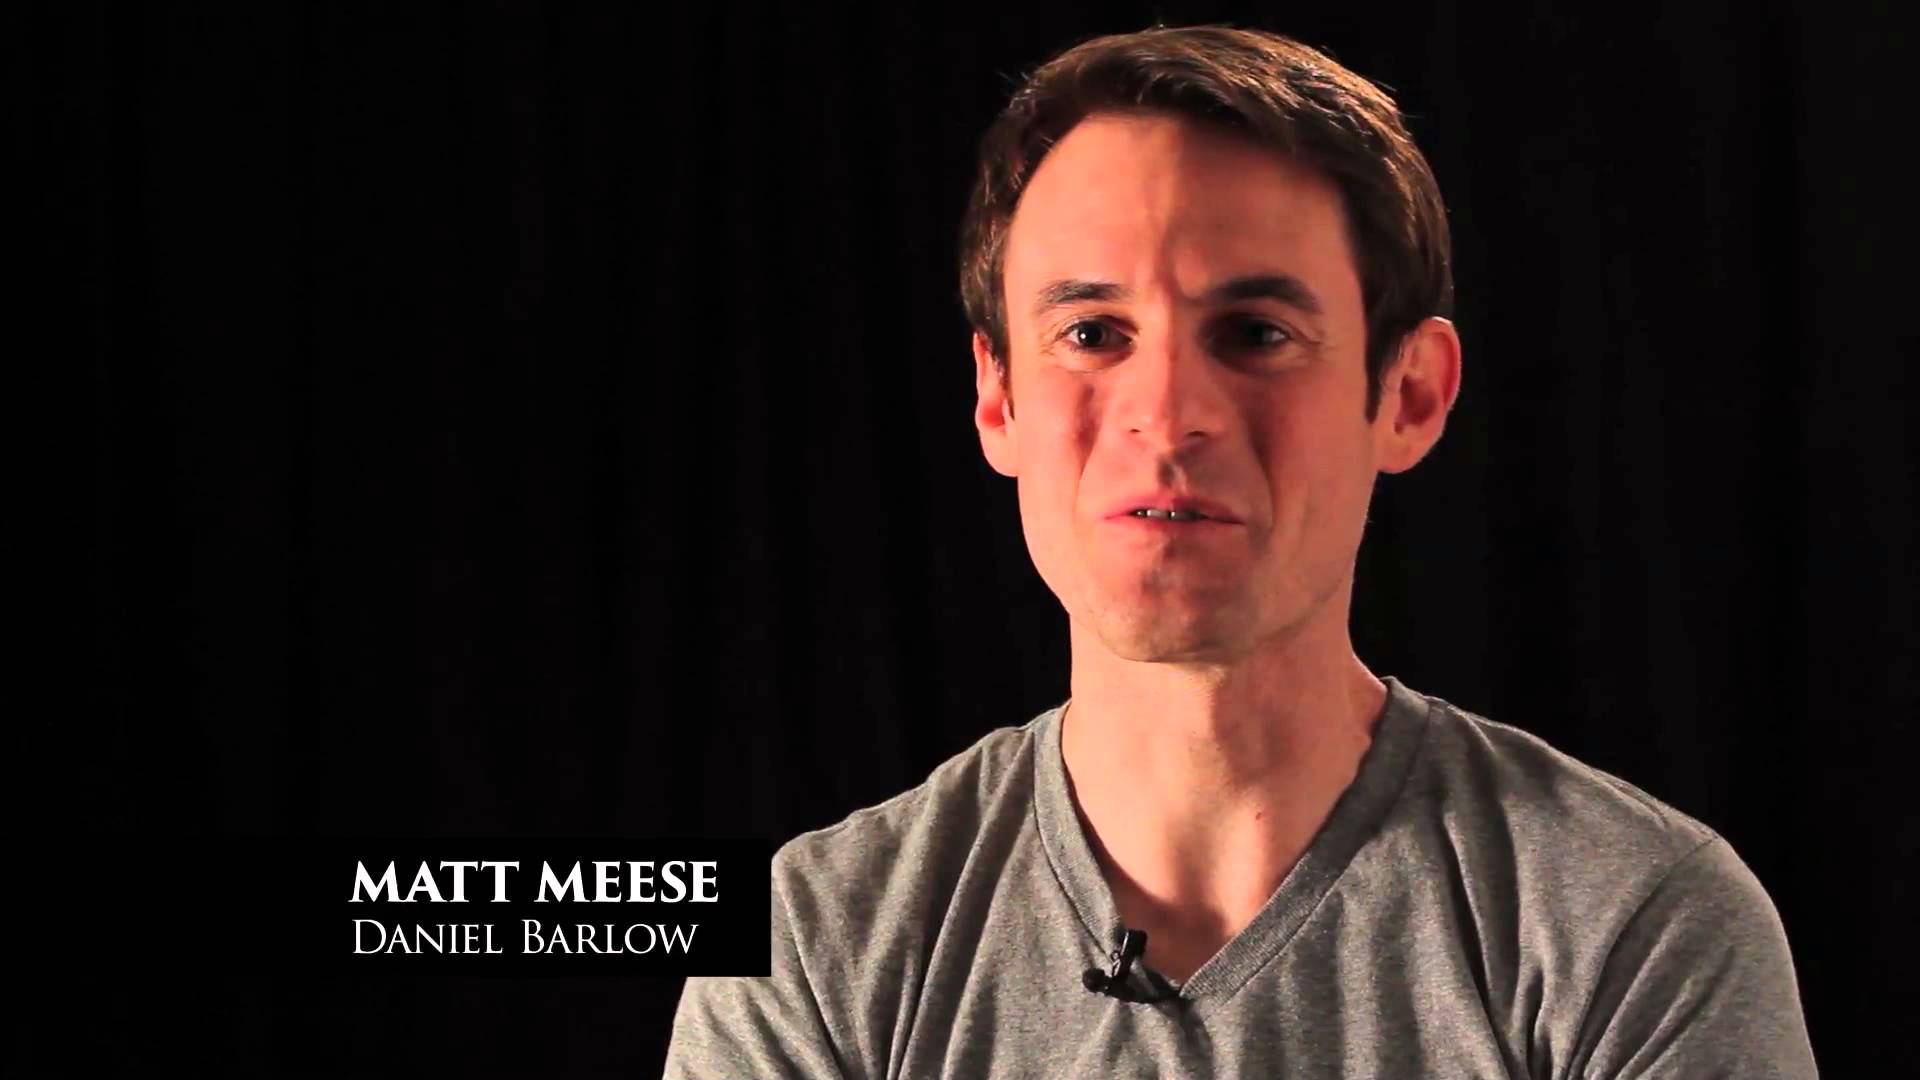 Read more about Matthew Meese: Family, Salary, Children, Married, Siblings,...